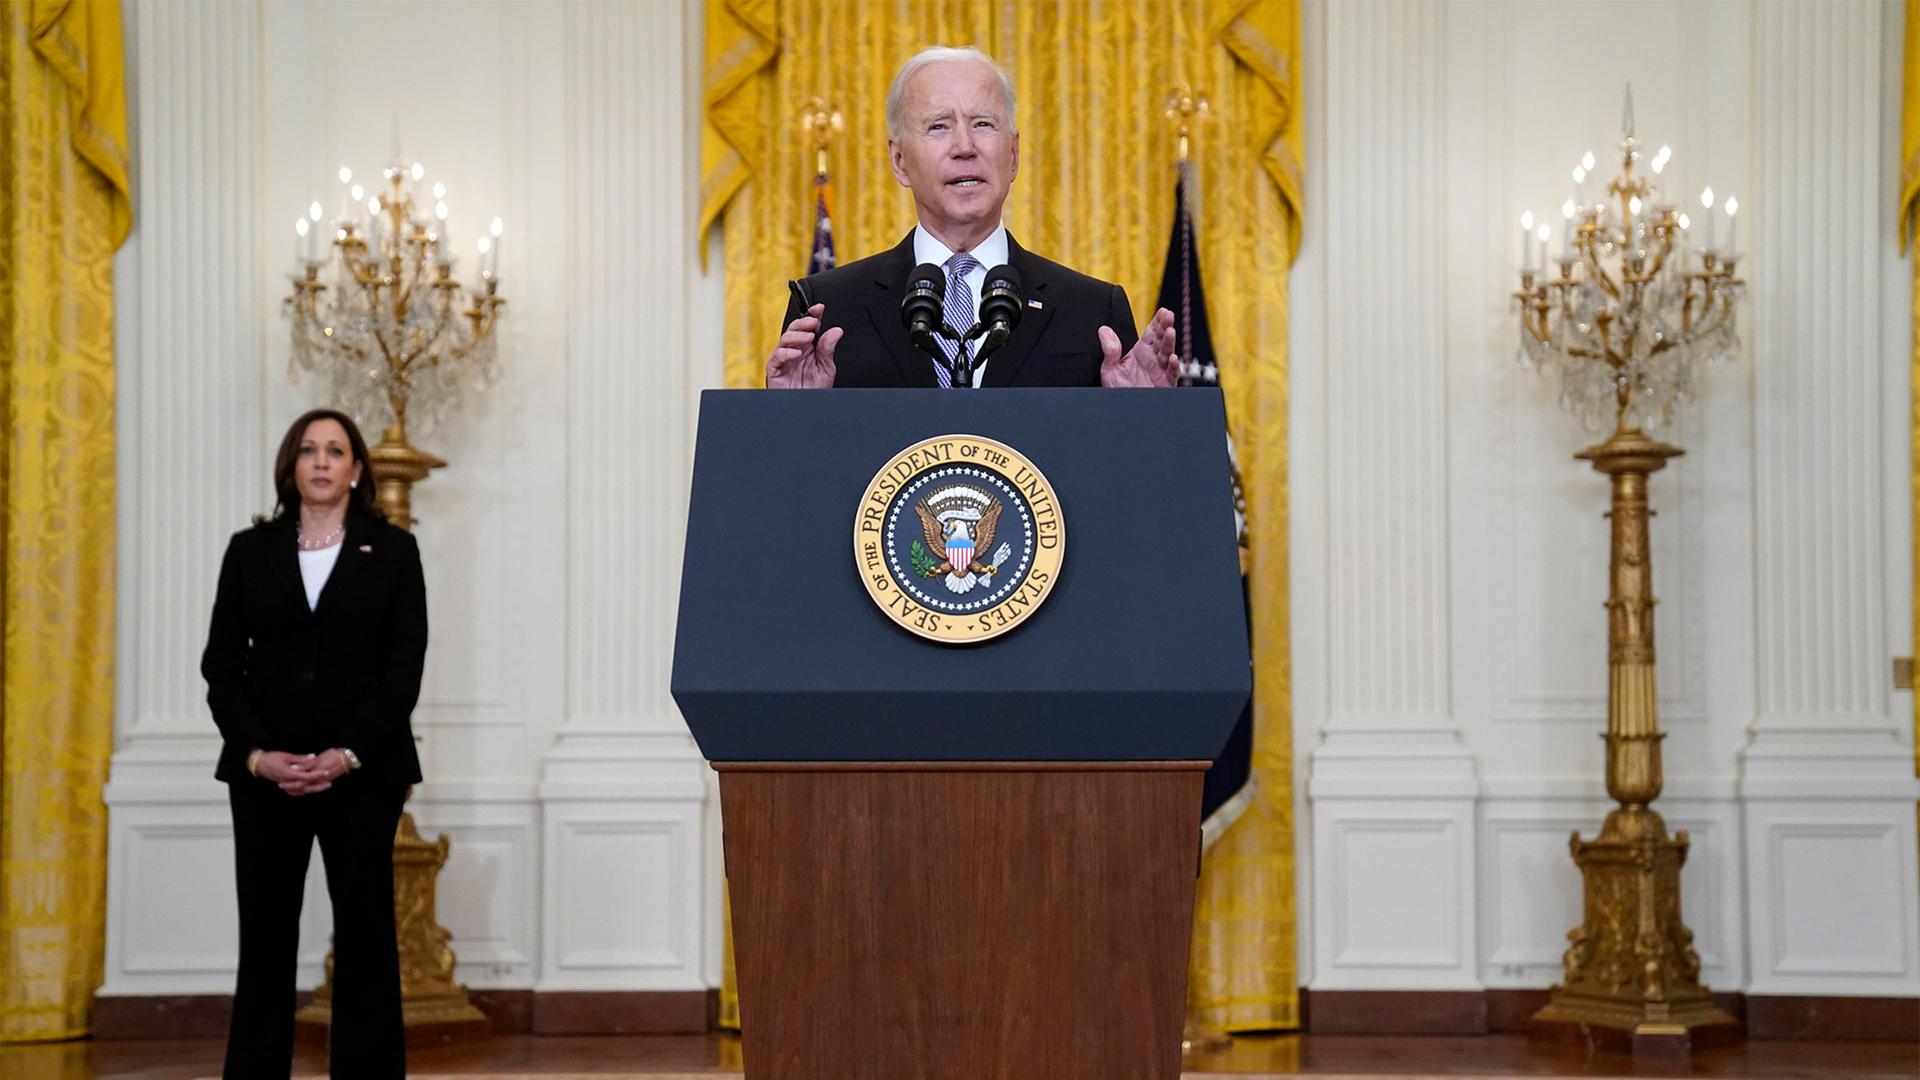 President Biden speaks at a podium while VP Harris stands to his right to listen